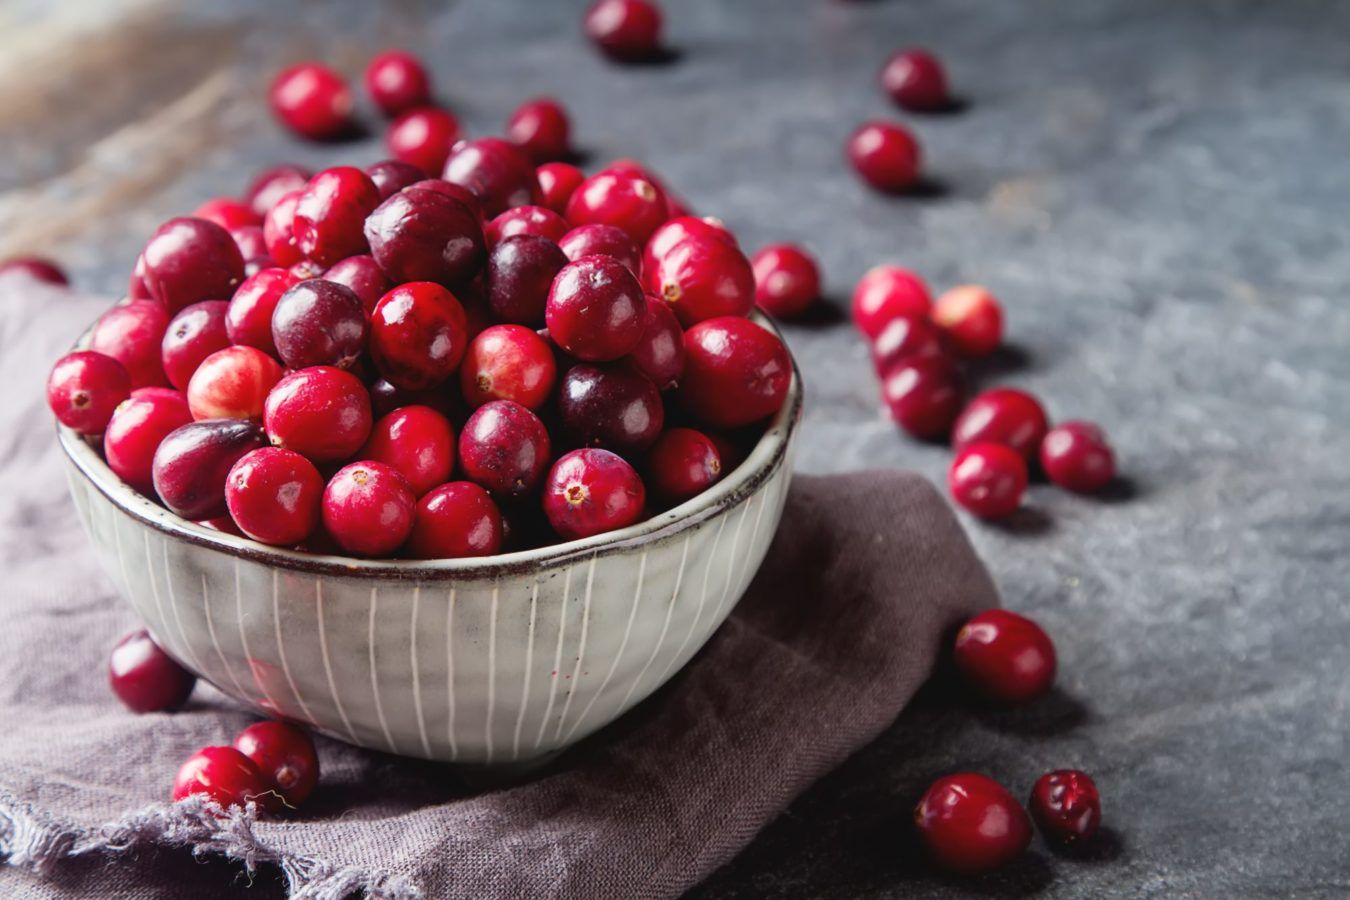 Eating cranberries every day could benefit your heart, new study reveals